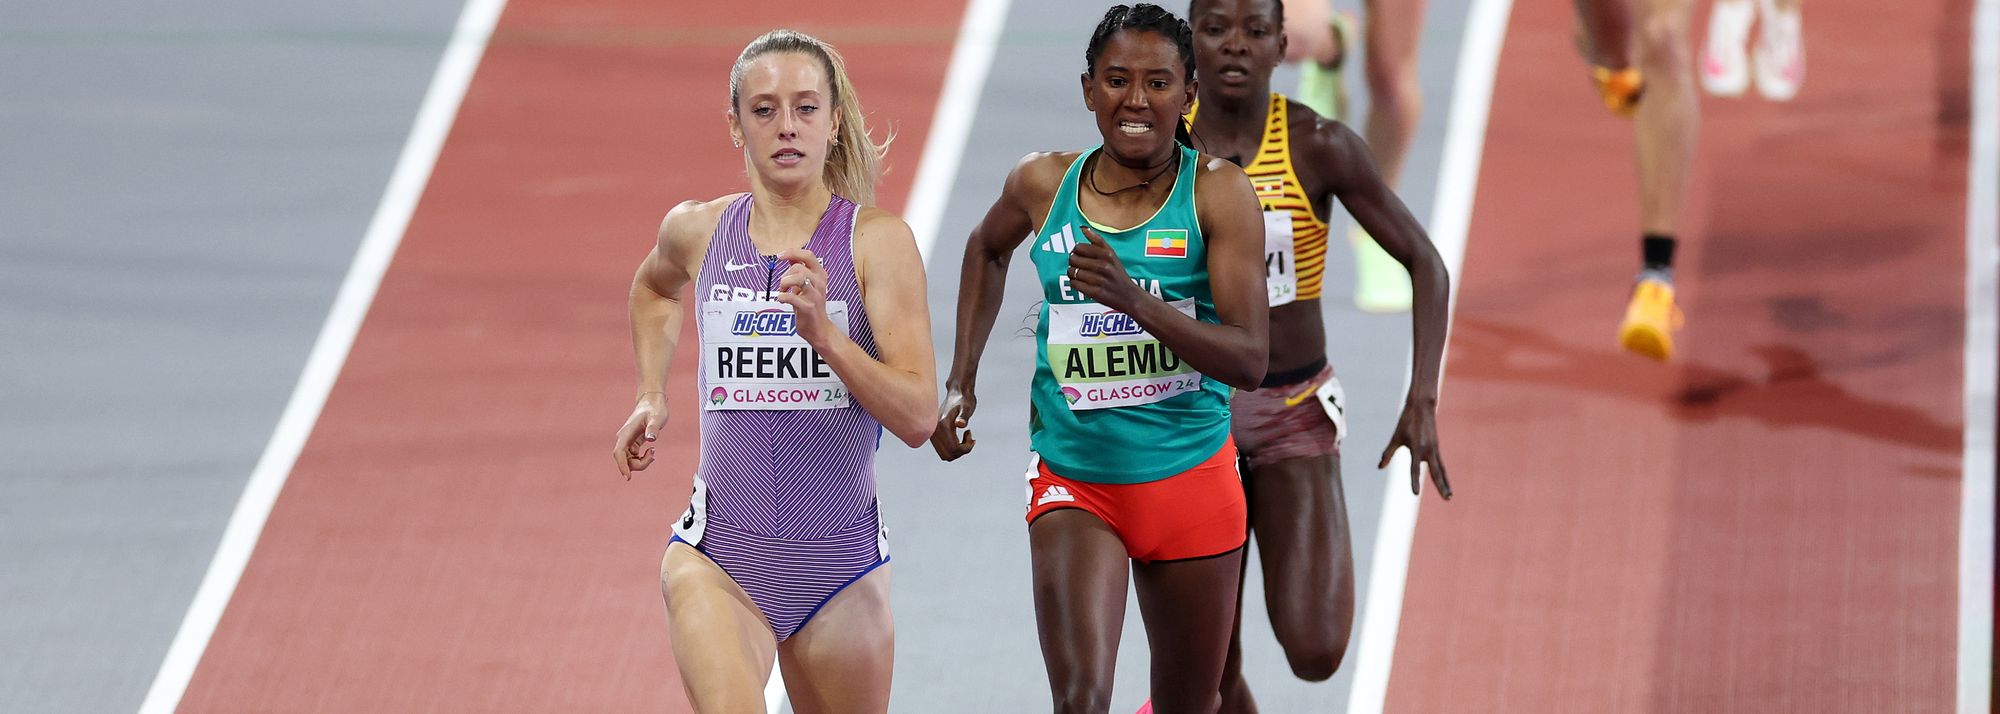 Expected highlights on the third and final day of action at the World Athletics Indoor Championships Glasgow 24